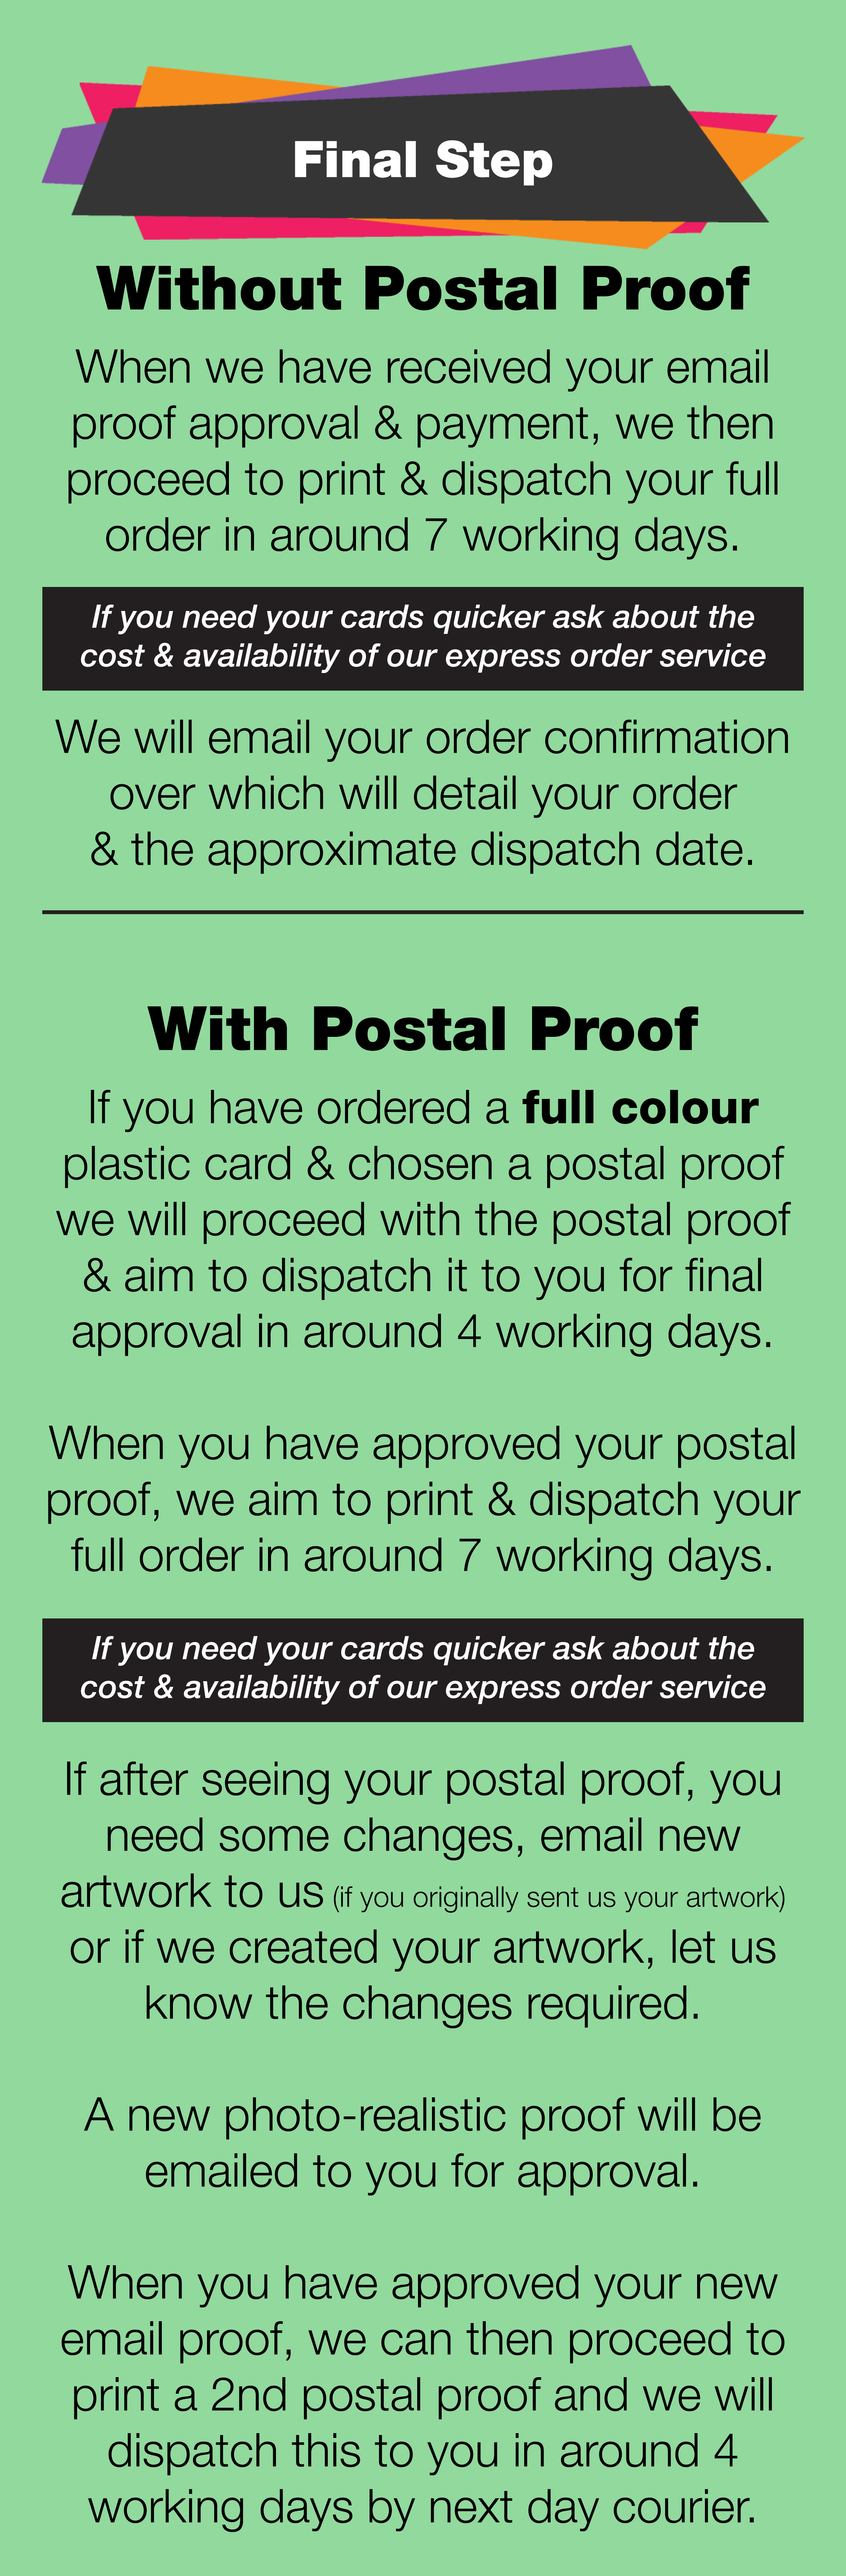 final step to order your plastic cards